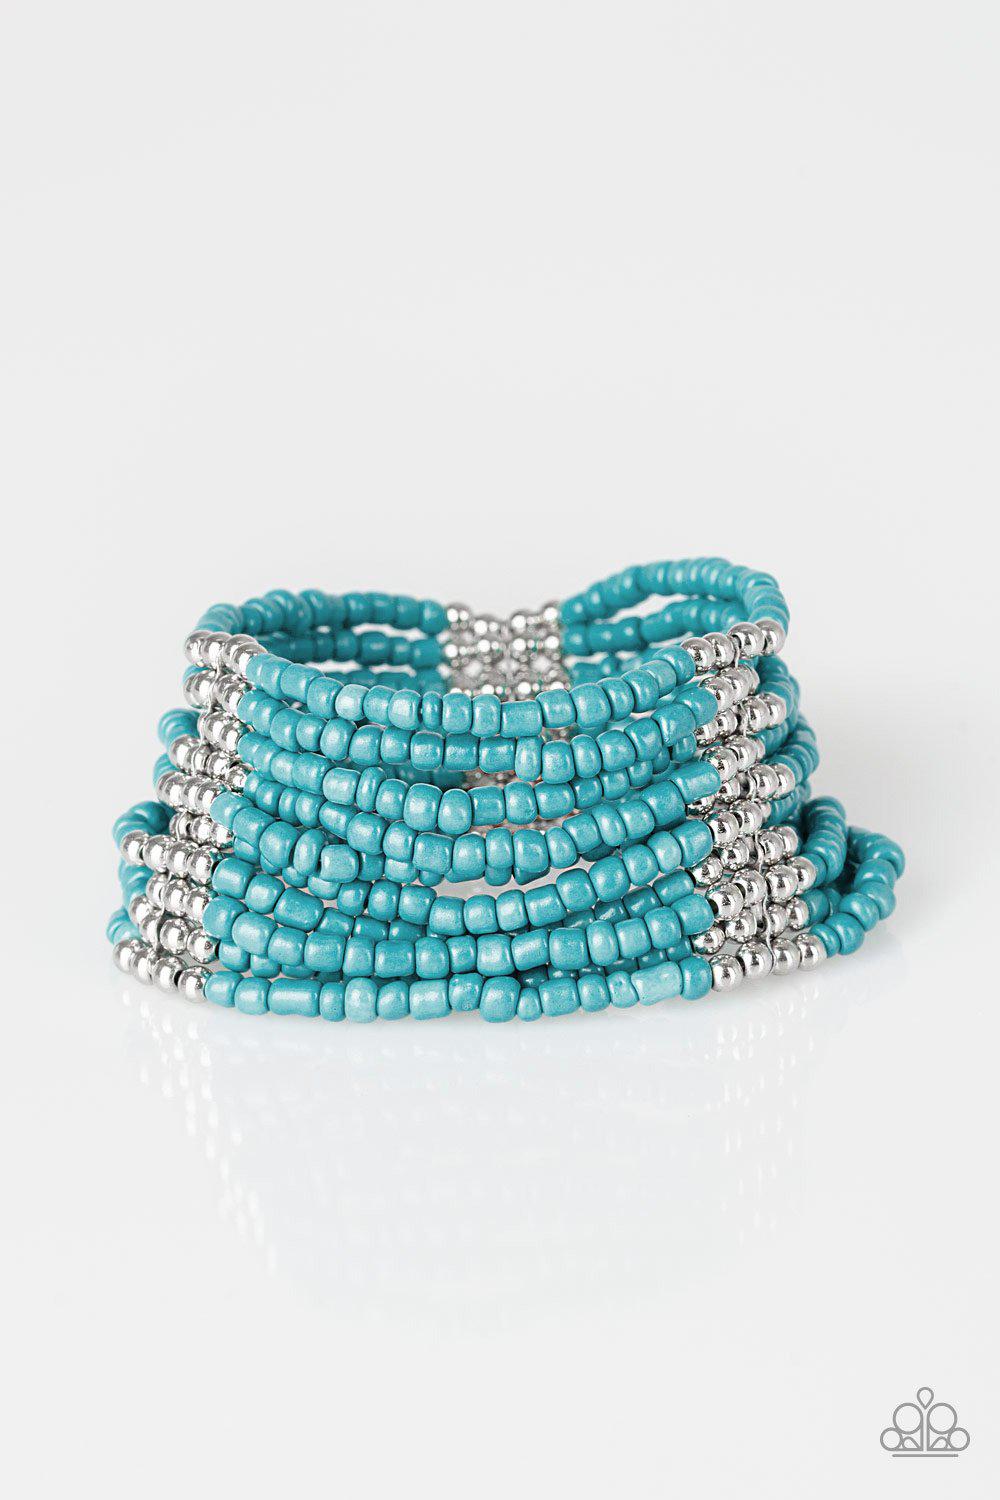 Outback Odyssey Turquoise Blue Seed Bead Bracelet - Paparazzi Accessories-CarasShop.com - $5 Jewelry by Cara Jewels